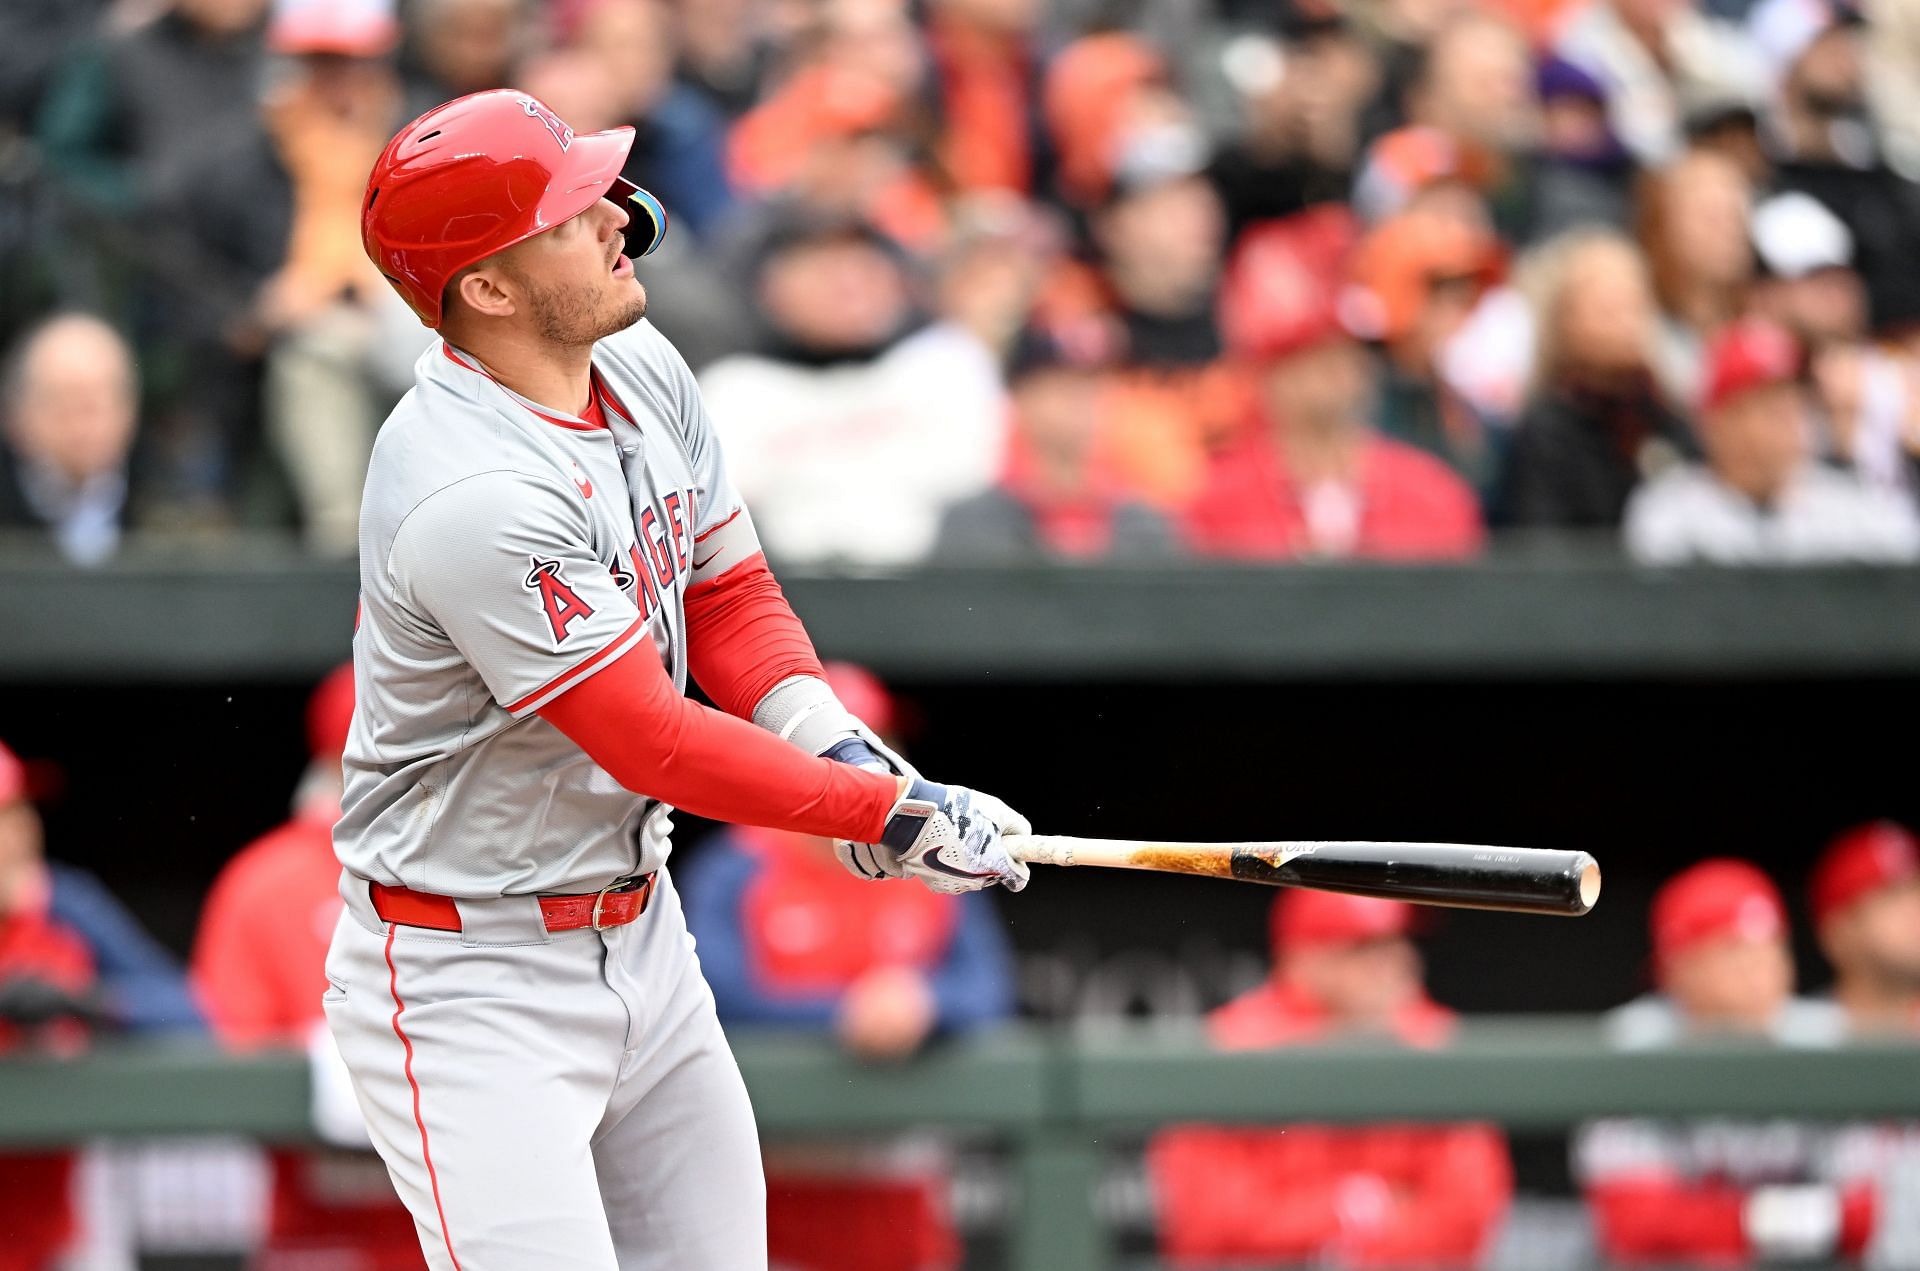 Los Angeles Angels - Mike Trout (Image via Getty)